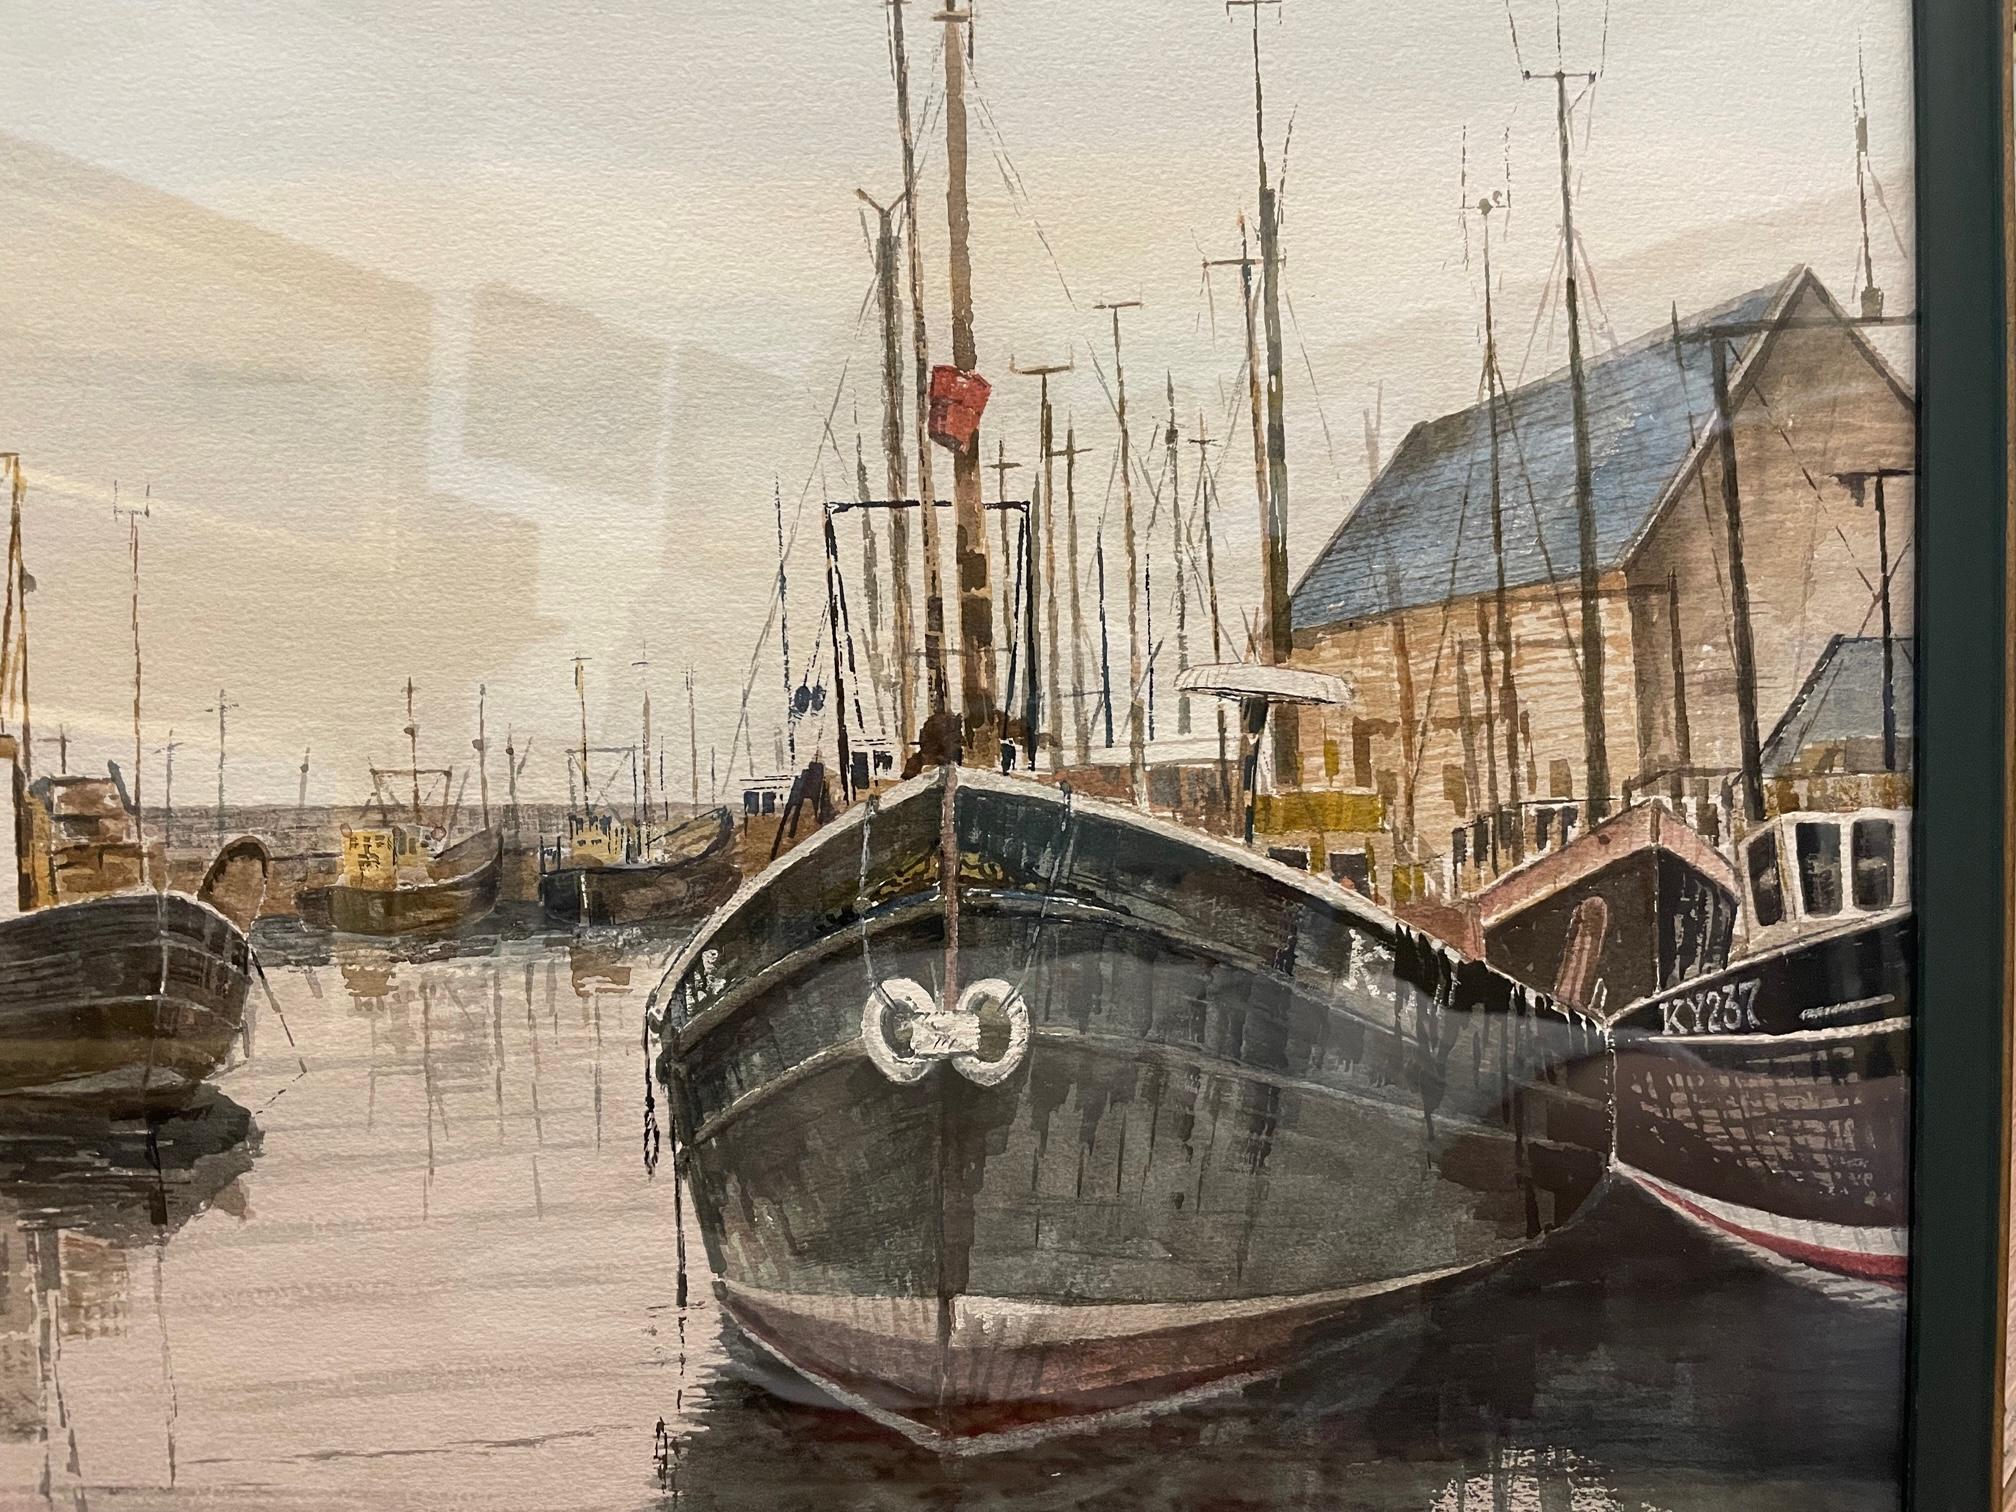 'Pittenweem Harbor' is by contemporary Scottish artist Robert Stirling, signed in lower left. Pittenweem is a fishing village on the east coast of Scotland in Fife, between St Andrews and Elie, an area known for local crafts and pottery.